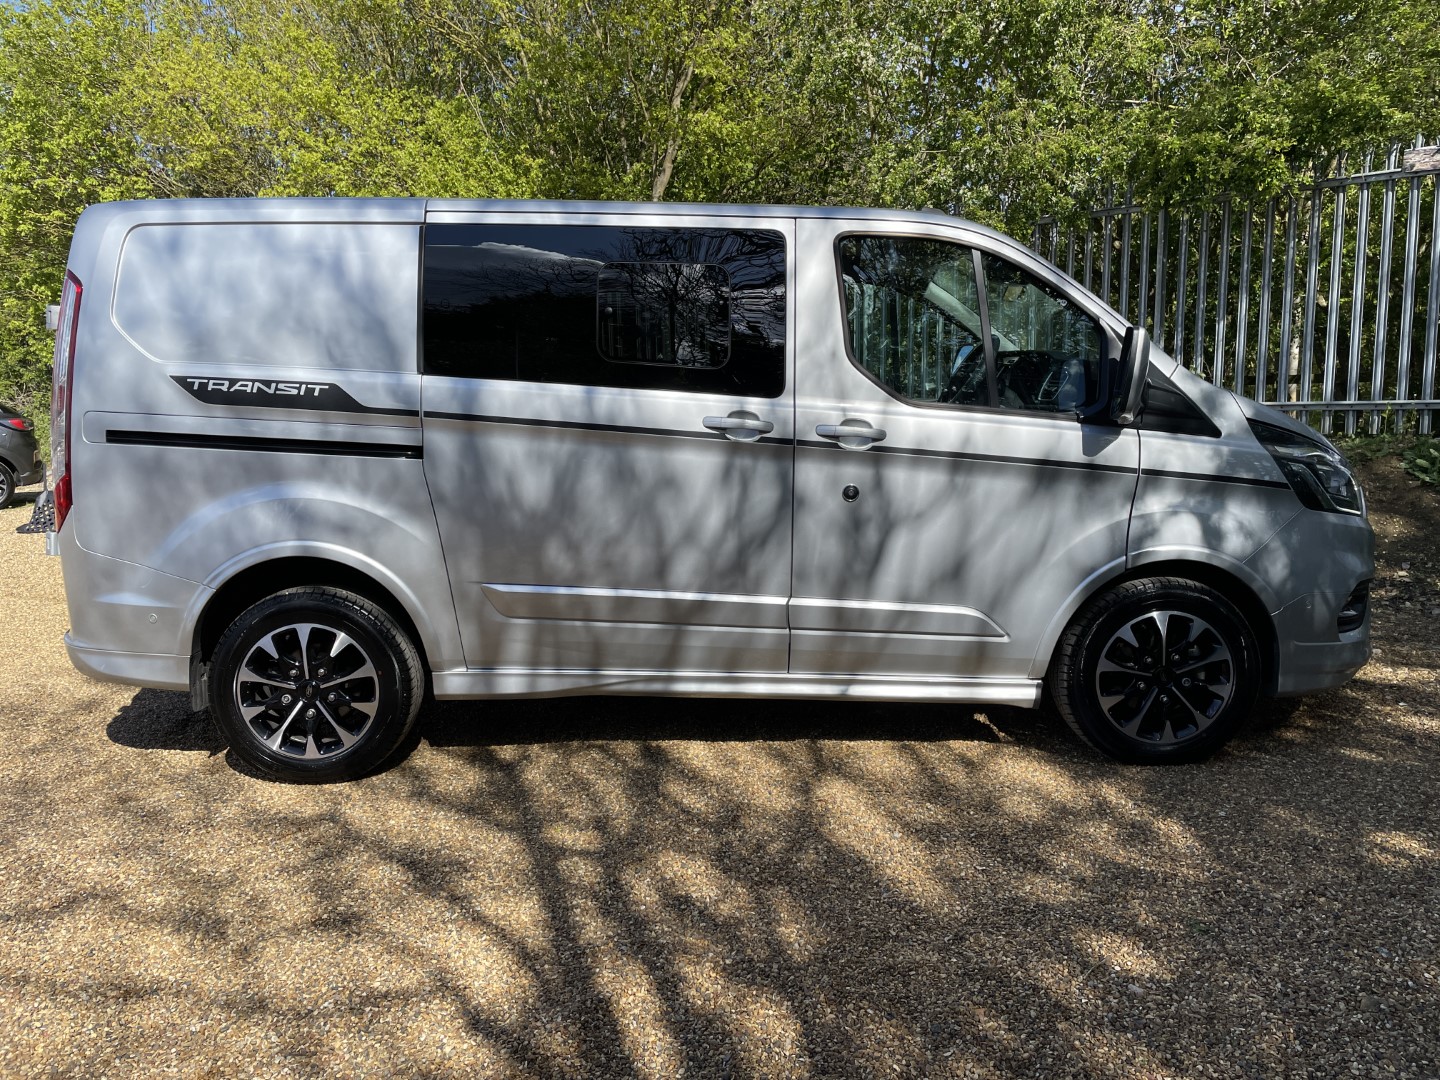 Transit Custom Sport Double in Cab Automatic for sale